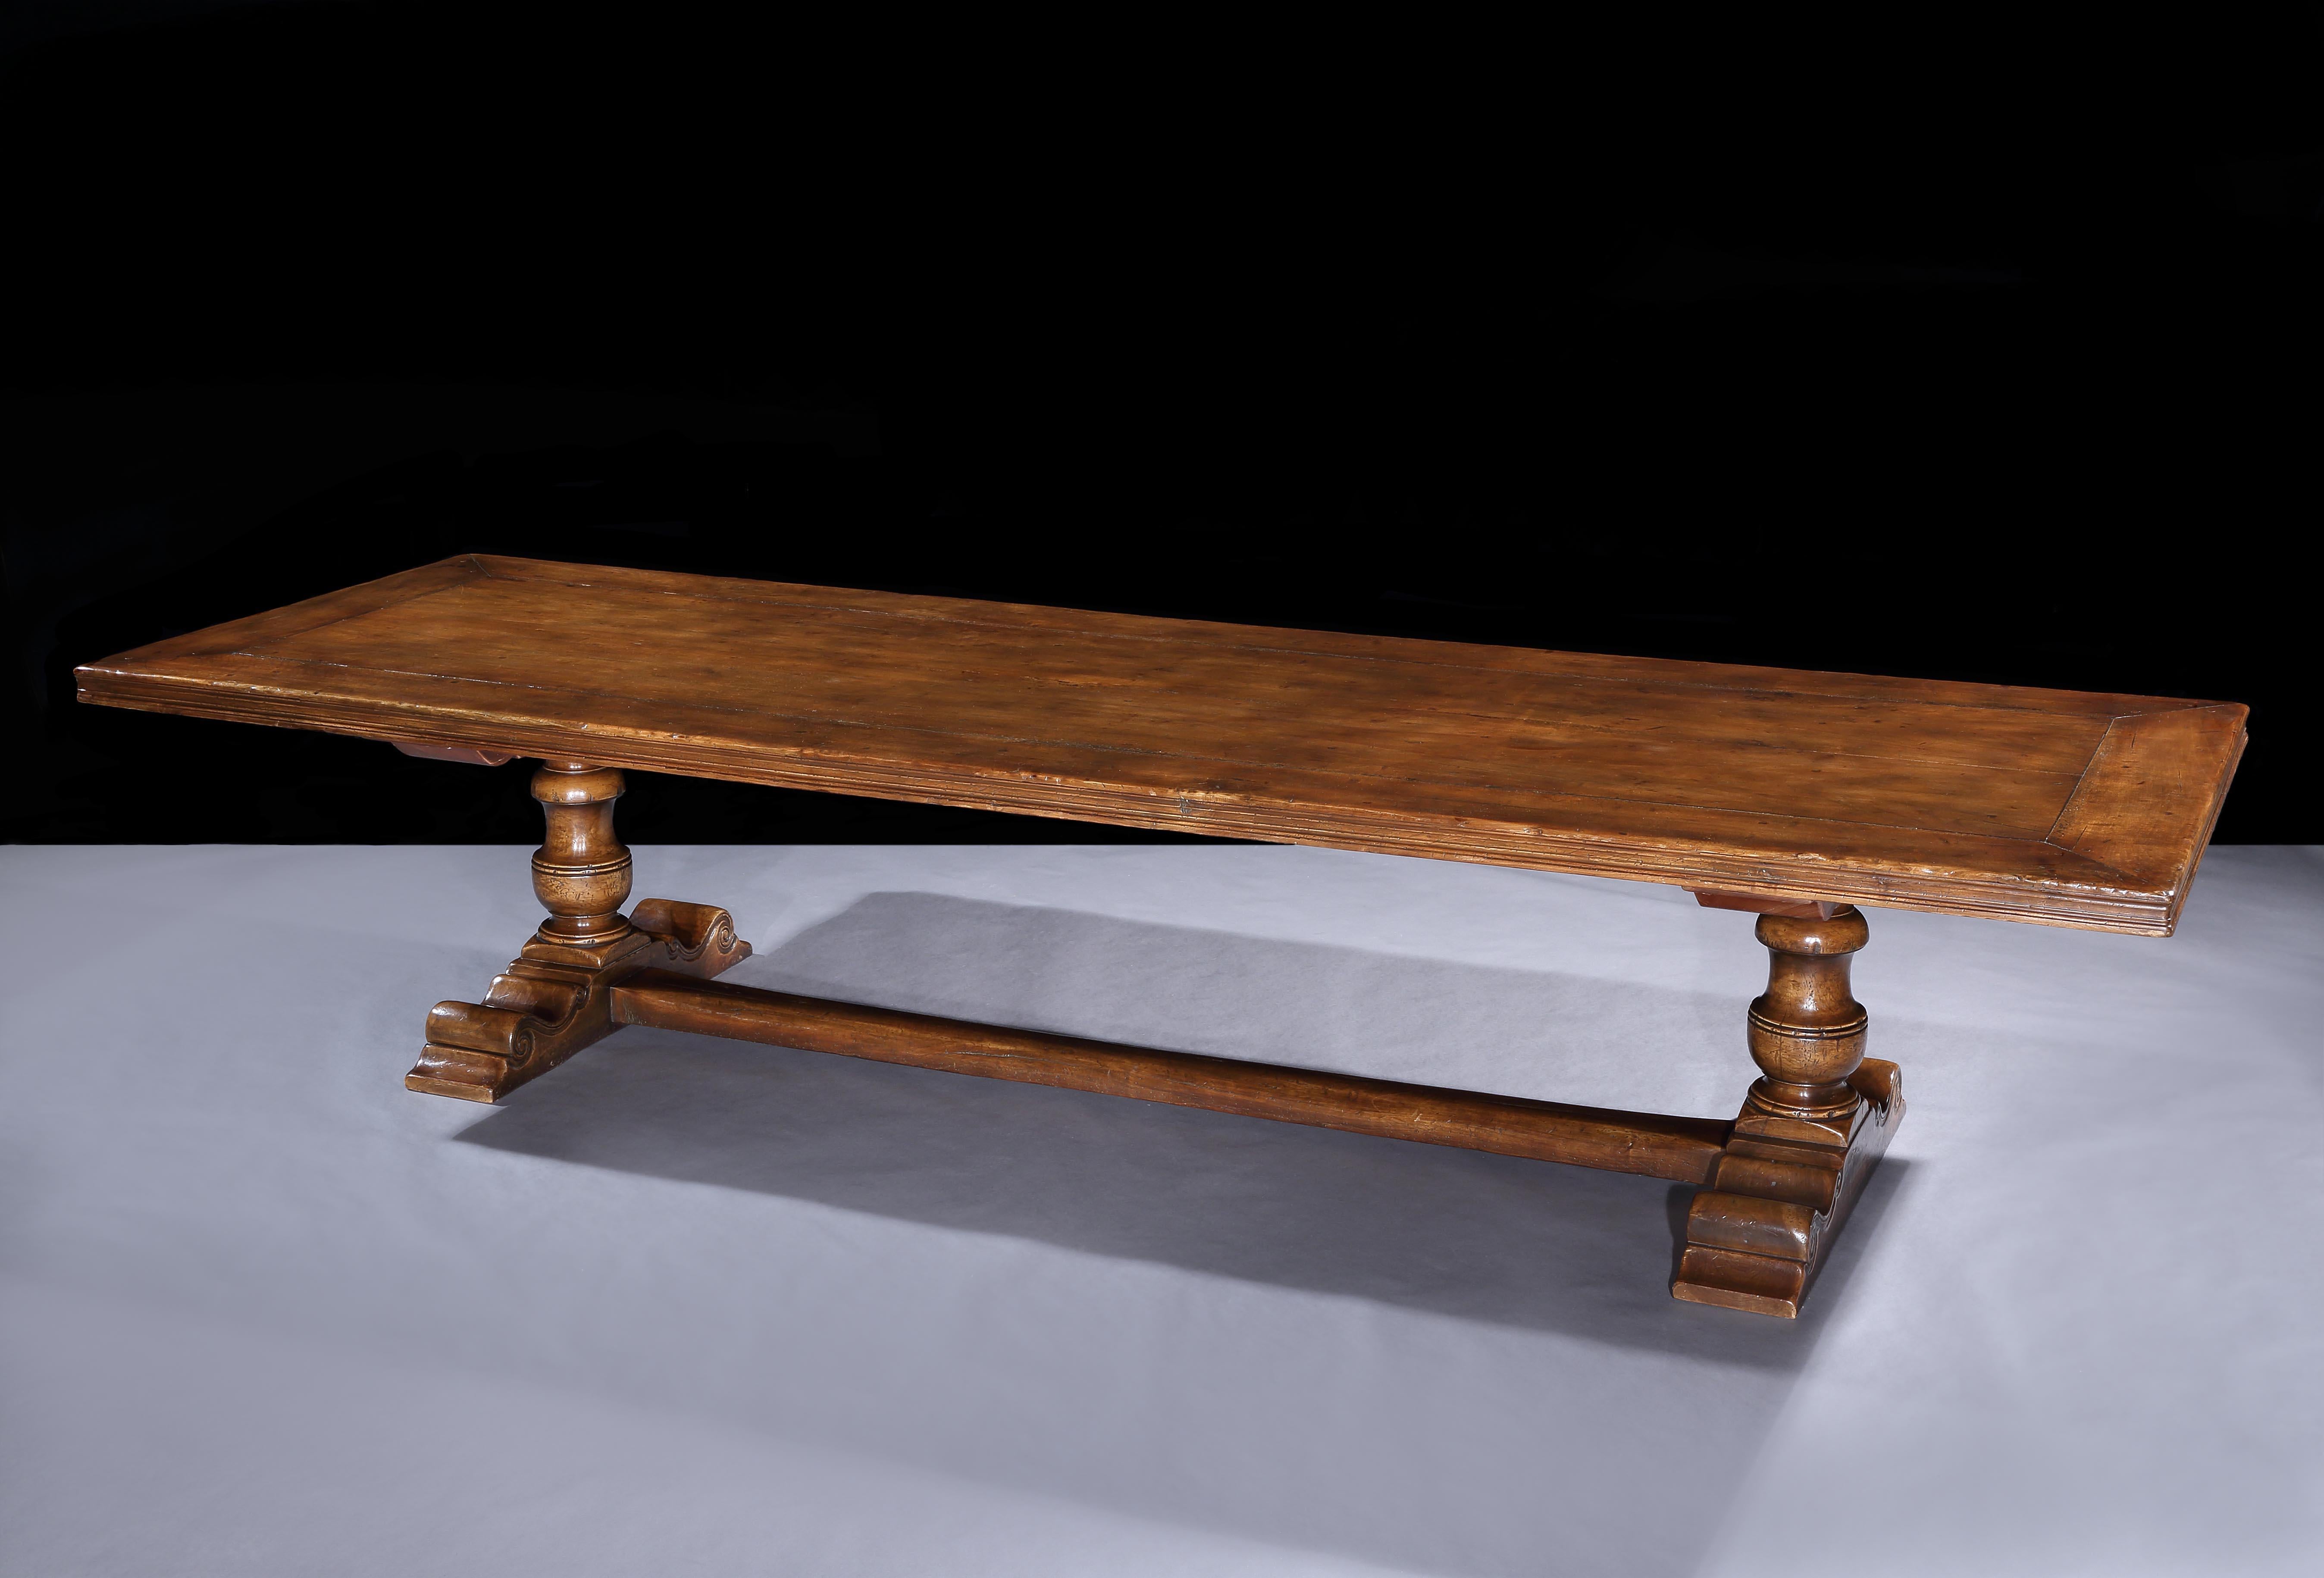 Period long trestle tables are the most practical tables to sit at. They are very hard to source and they tend to be narrow. This is a decorative piece probably only 40 years old or so, but as it is impossible to source period tables of this size